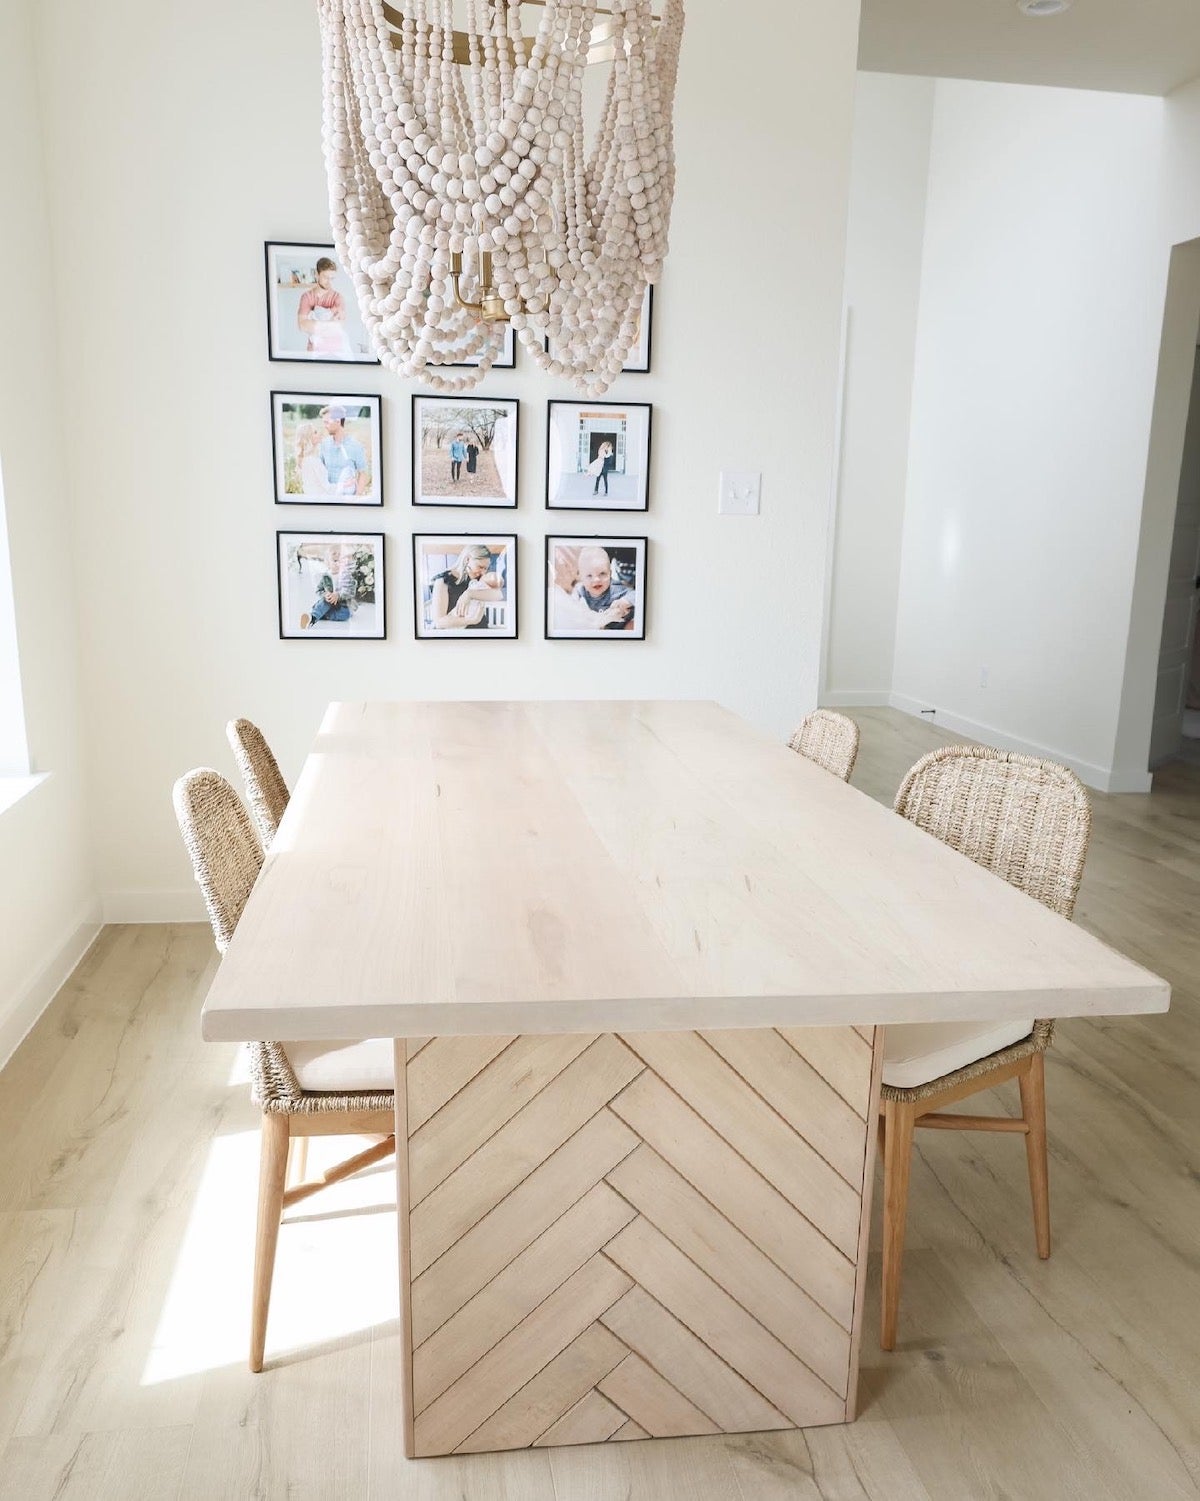 9 frame grid gallery wall in minimalist dining room featuring family portraits in Artifact Uprising Modern Metal Frames behind dining table and roped chandelier